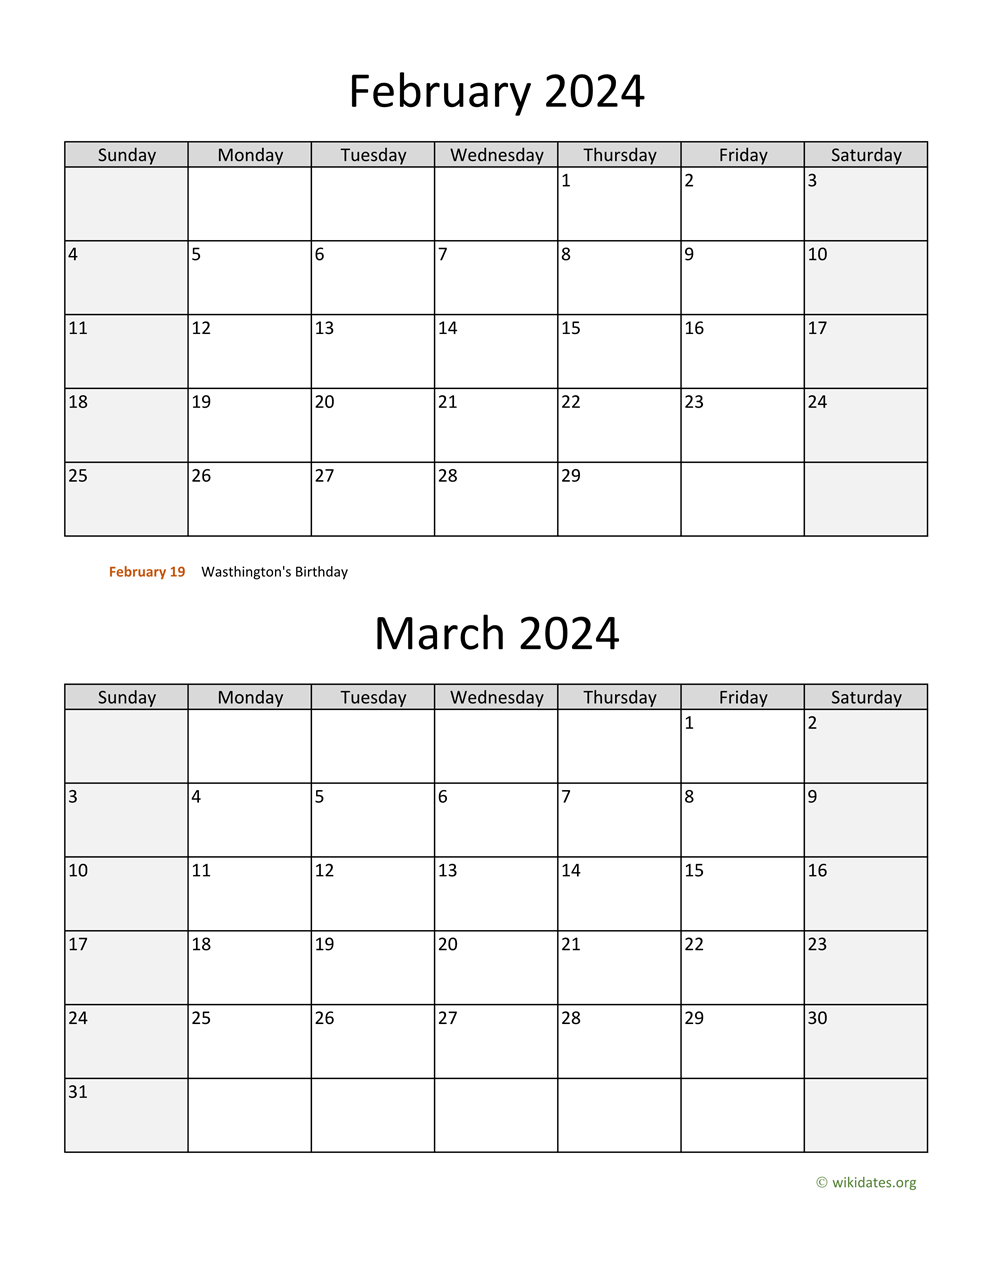 February And March 2024 Calendar | Wikidates for Printable February And March 2024 Calendar